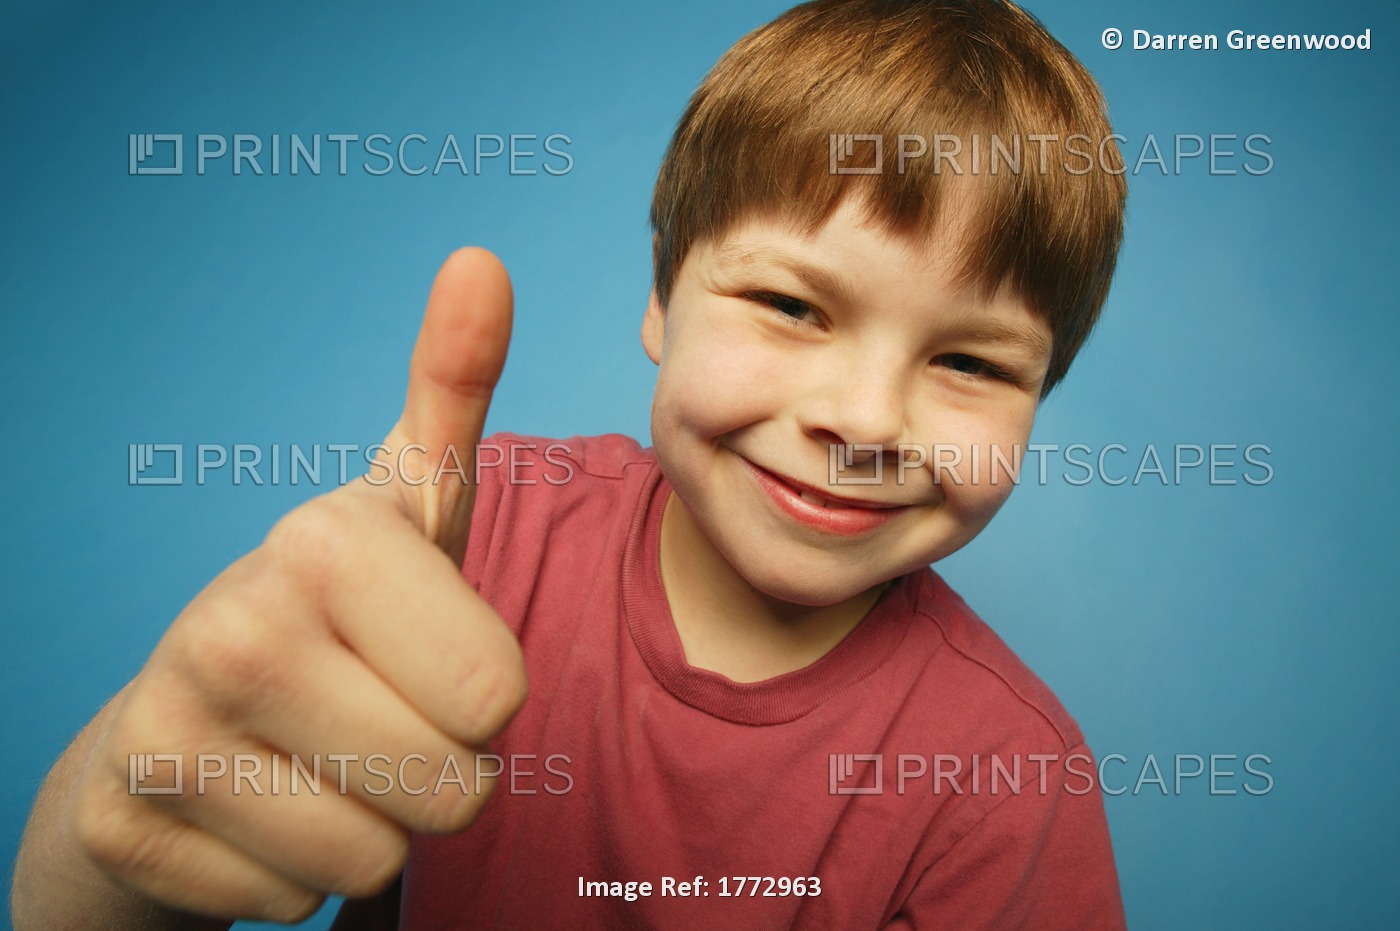 Boy Giving The Thumbs Up Sign